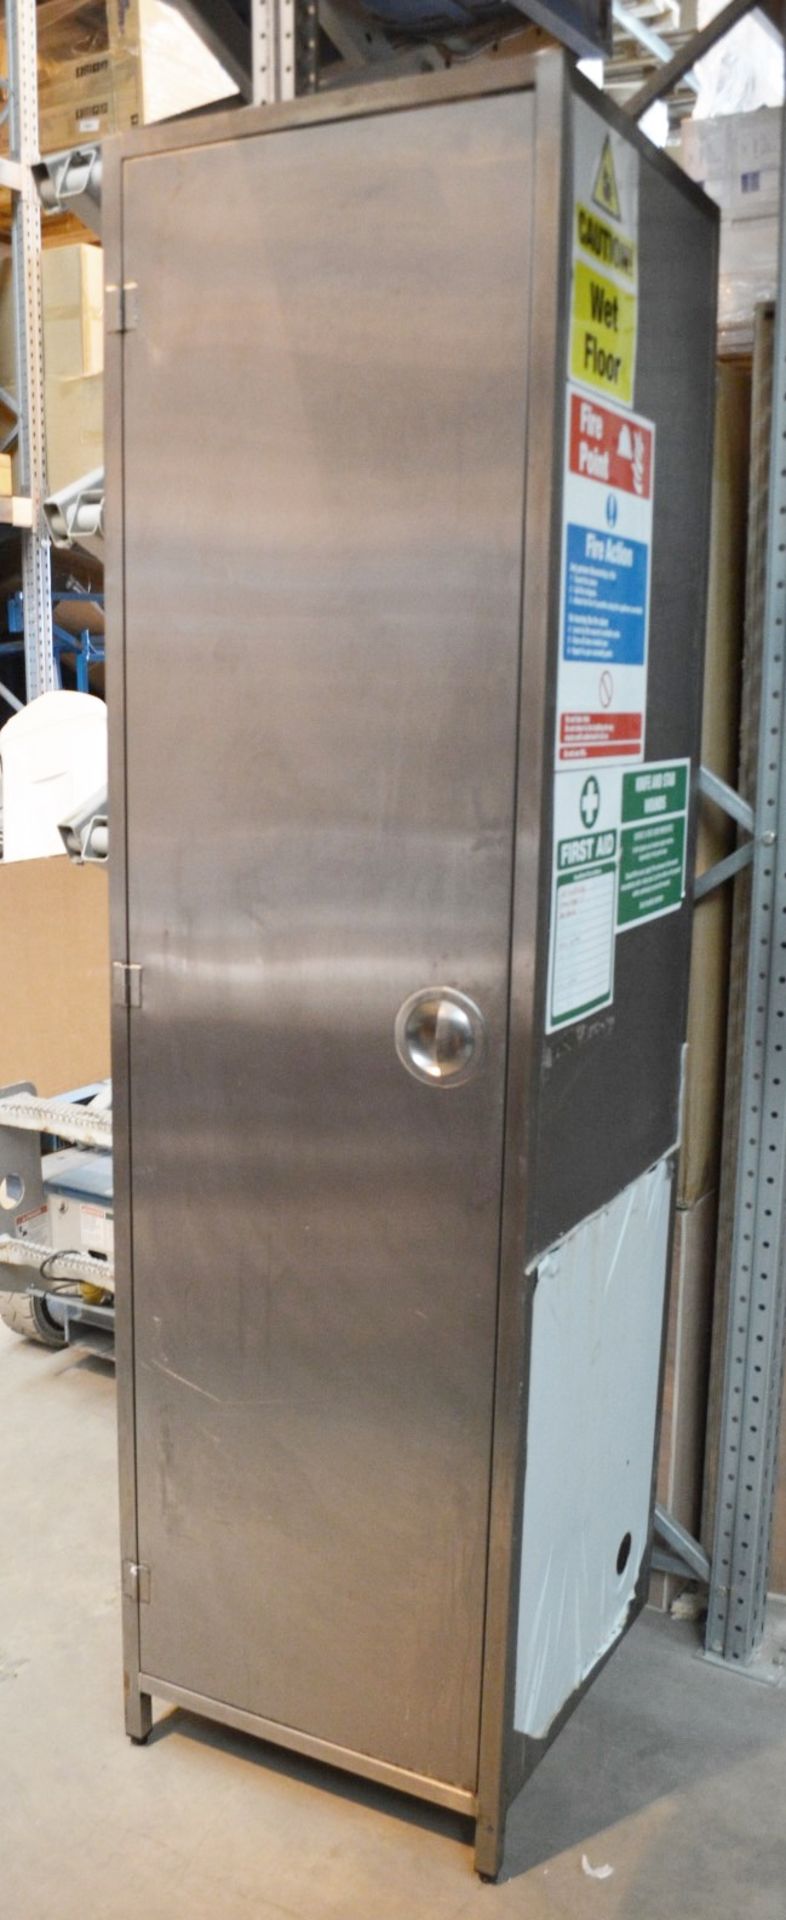 1 x Stainless Steel Commercial Kitchen  Wall-mounted Utility Cupboard - Dimensions: H220xW60xD60cm